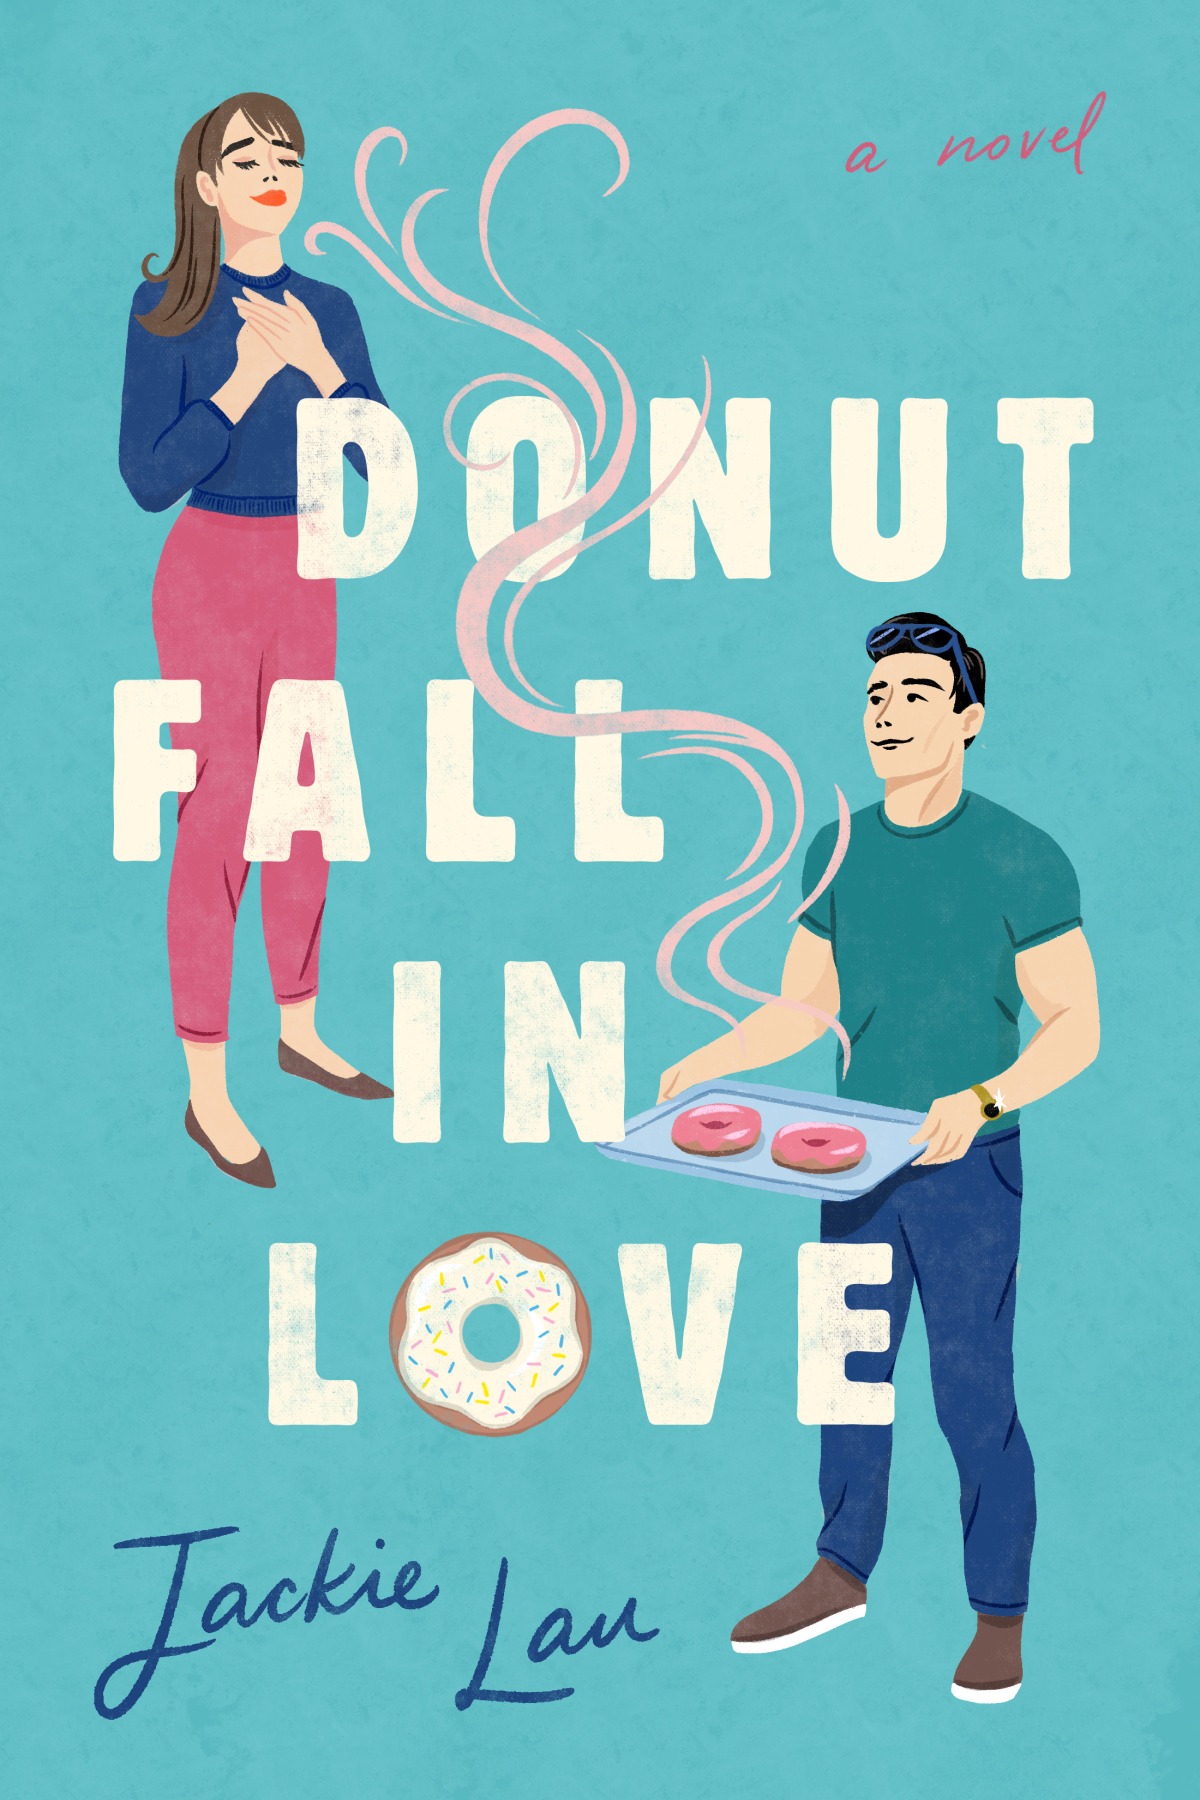 Another delicious romance: Donut Fall in Love by Jackie Lau  @PRHGlobal #partner #BookLovers #romance